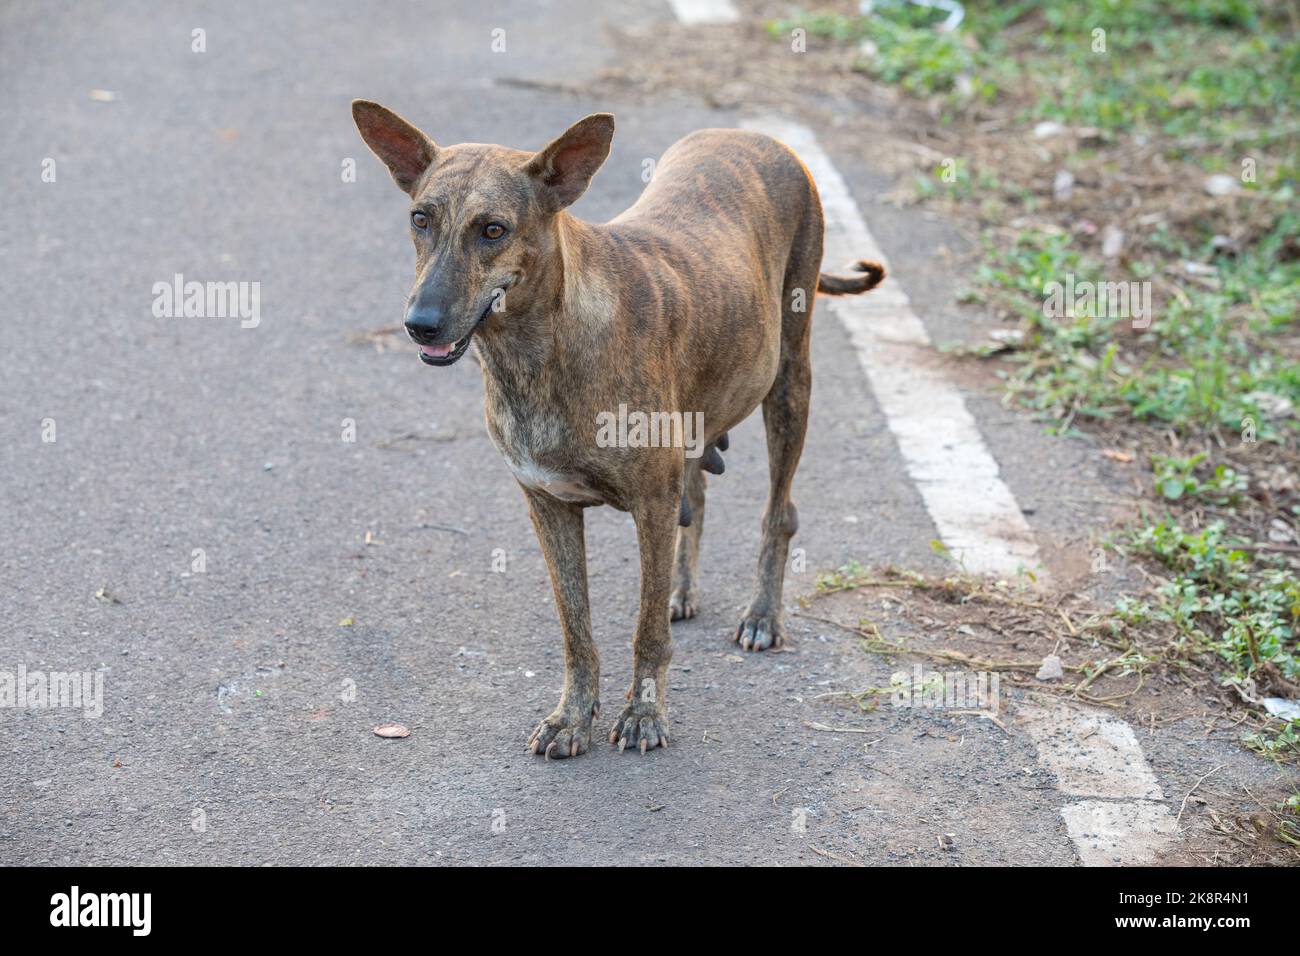 The Indian pariah dog, also known as the Indian native dog. Stock Photo